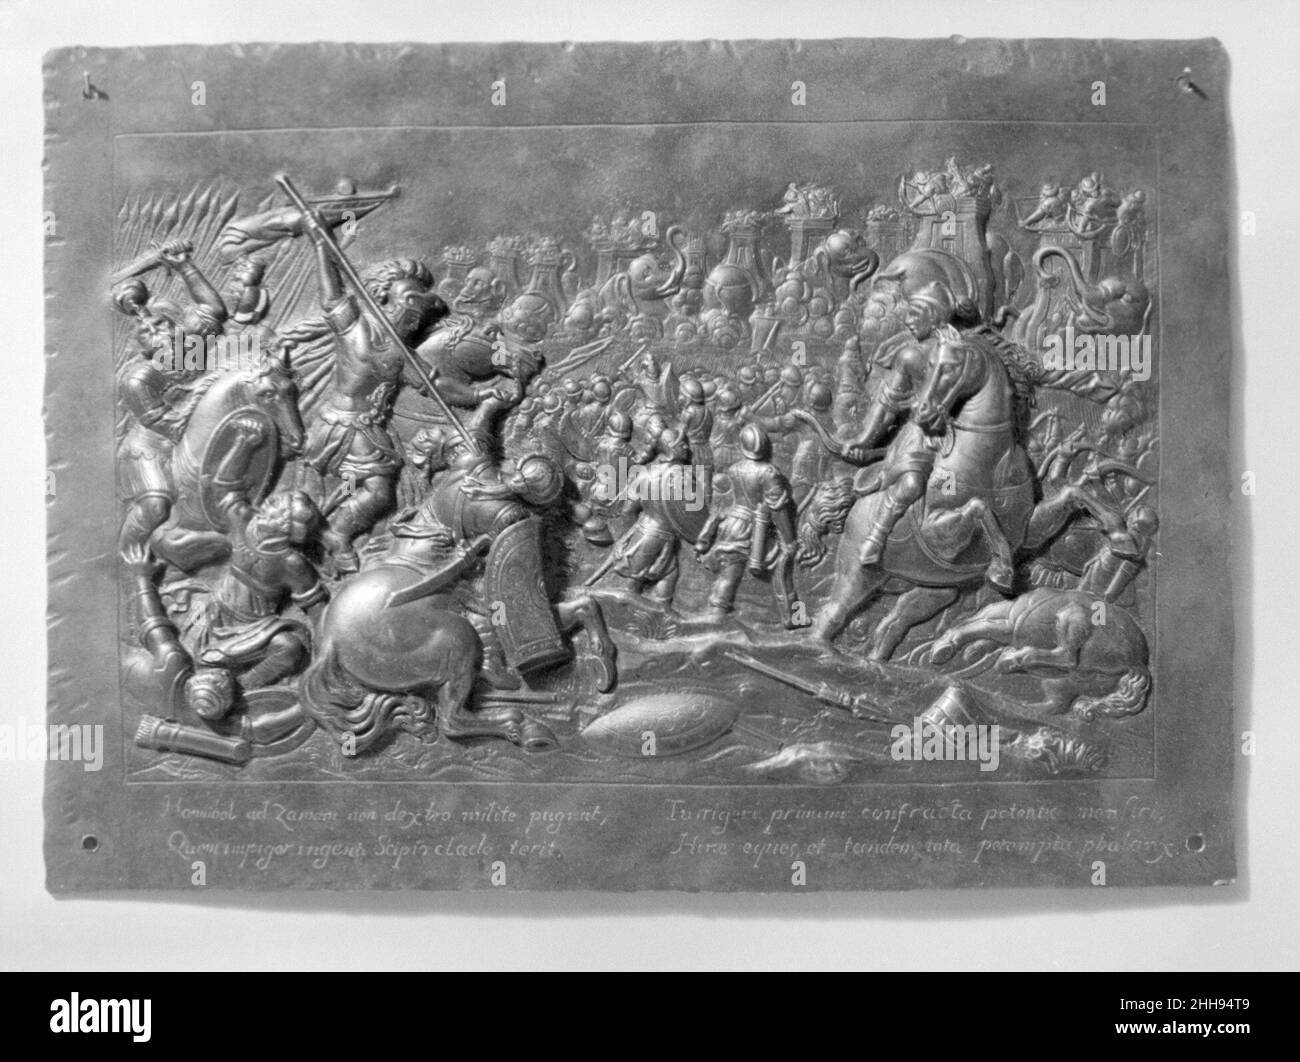 Scenes from the Battle of Zama 17th century possibly French. Scenes from the Battle of Zama. possibly French. 17th century. Iron. Medals and Plaquettes Stock Photo